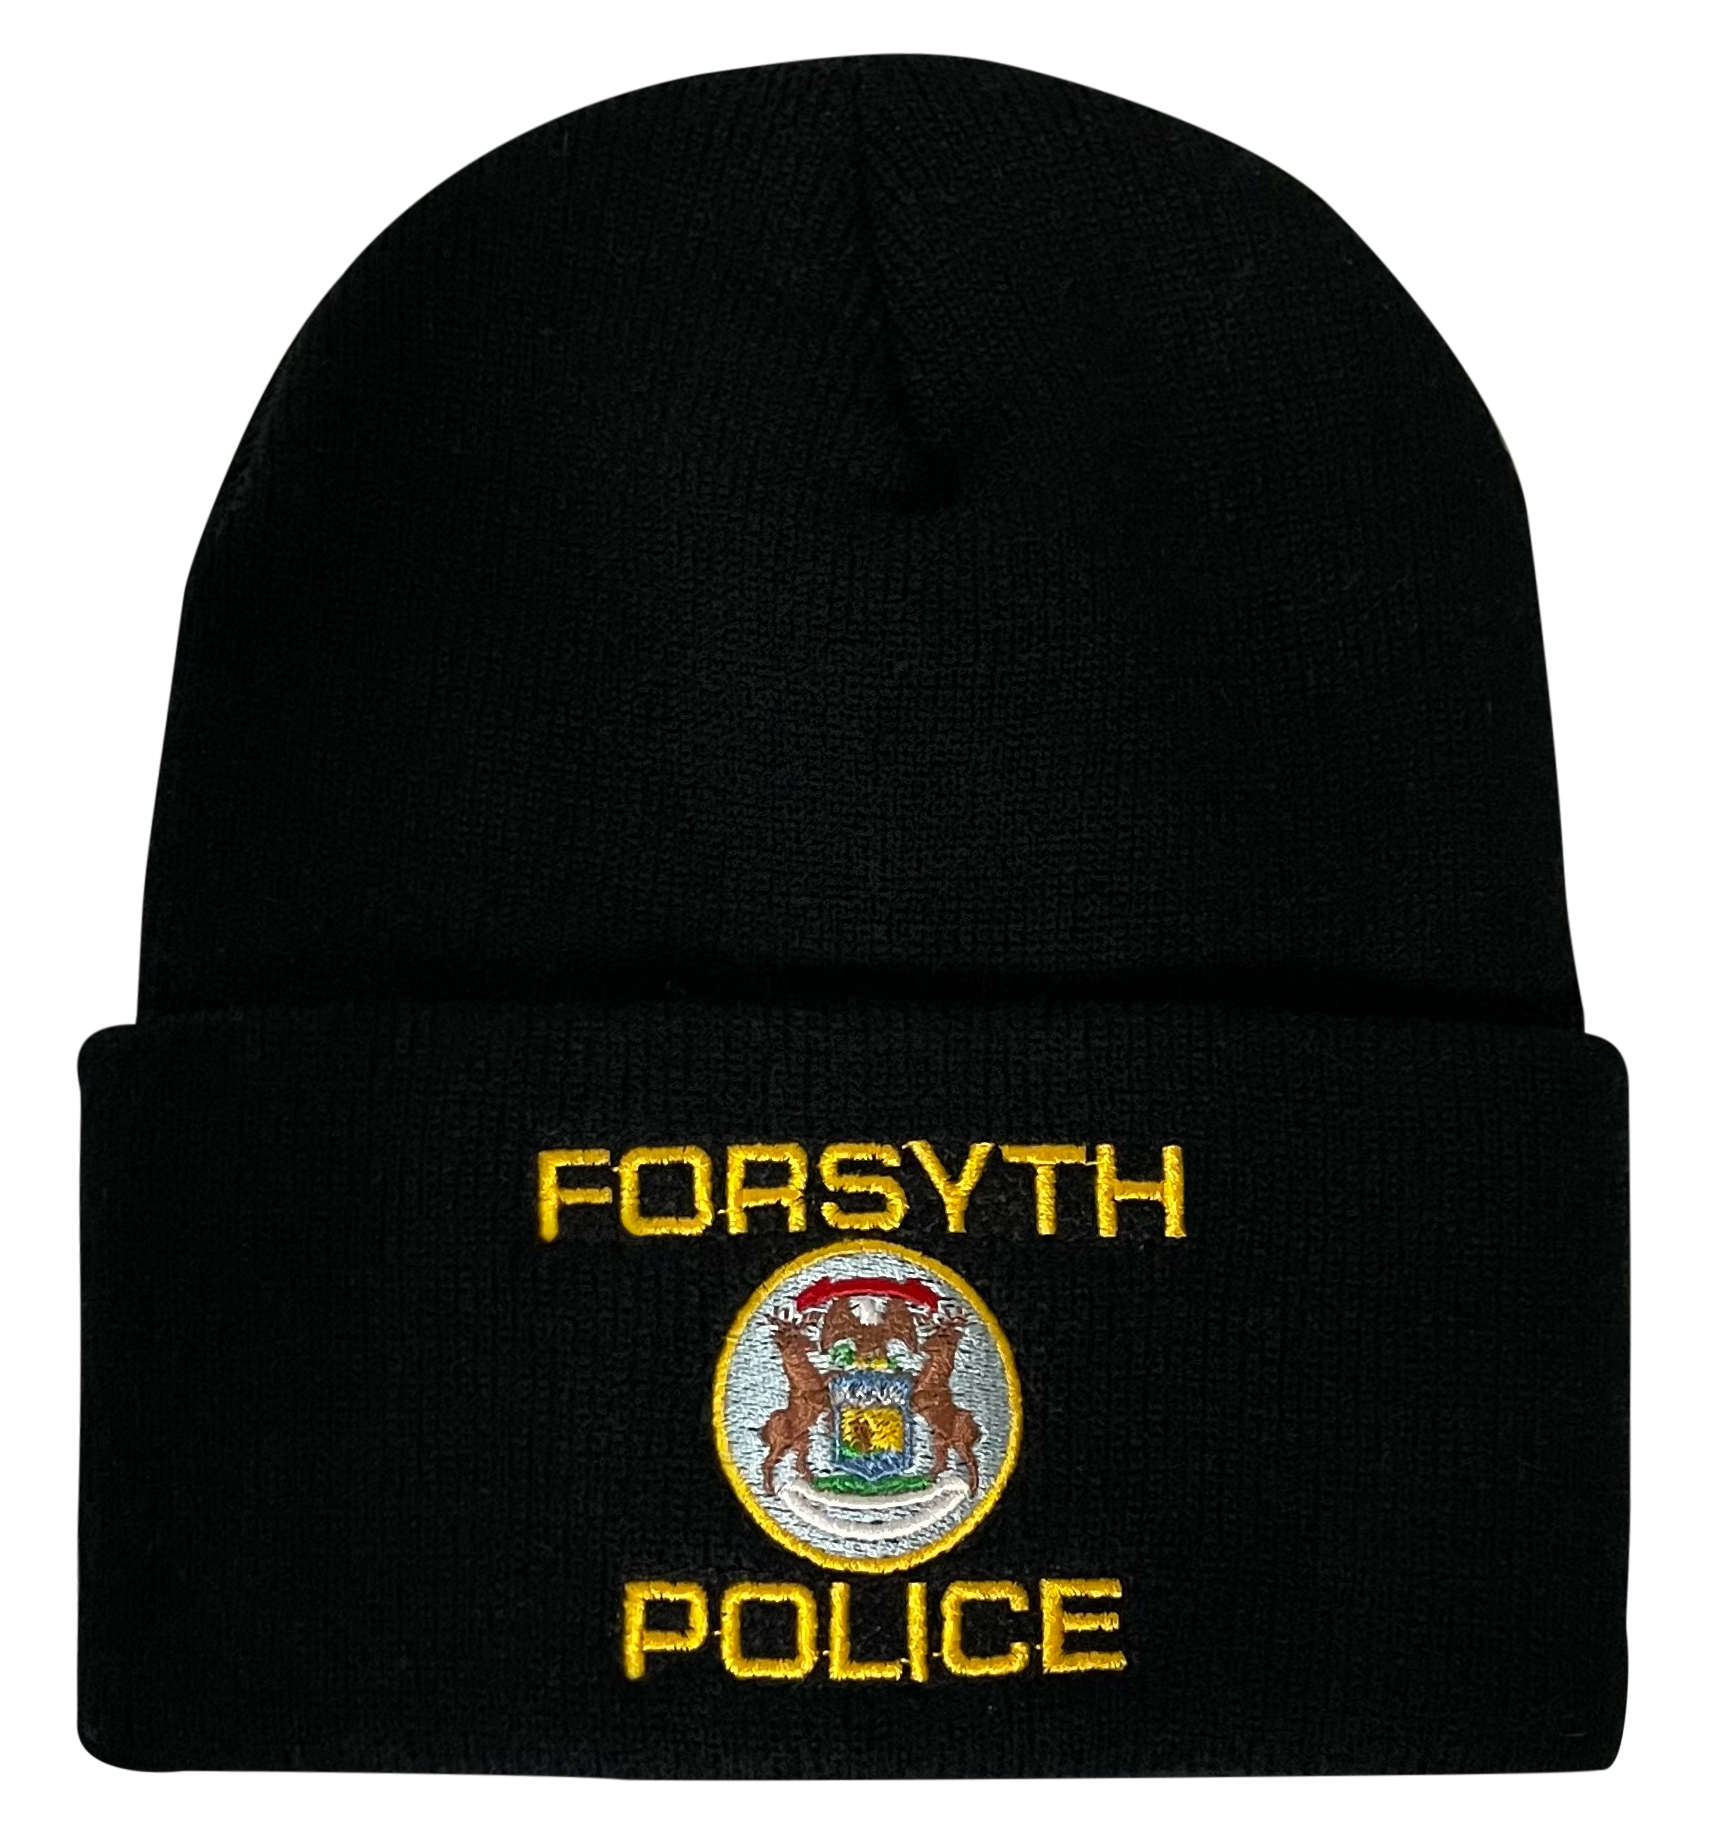 A black beanie with the words forsyth police embroidered on it